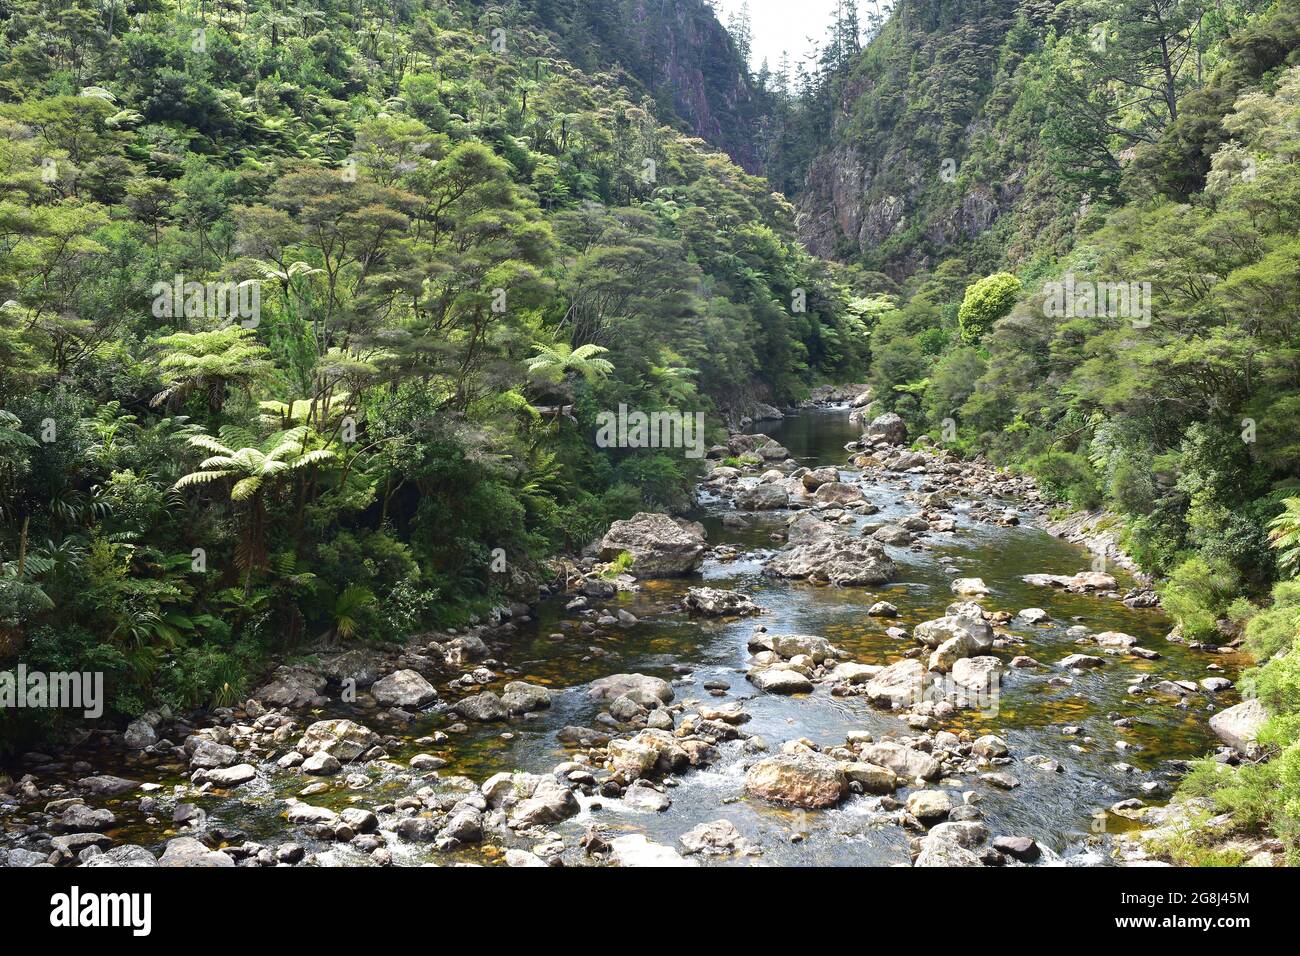 Waitawheta River with many boulders in shallows flowing through narrow gorge opening into valley with native bush. Stock Photo